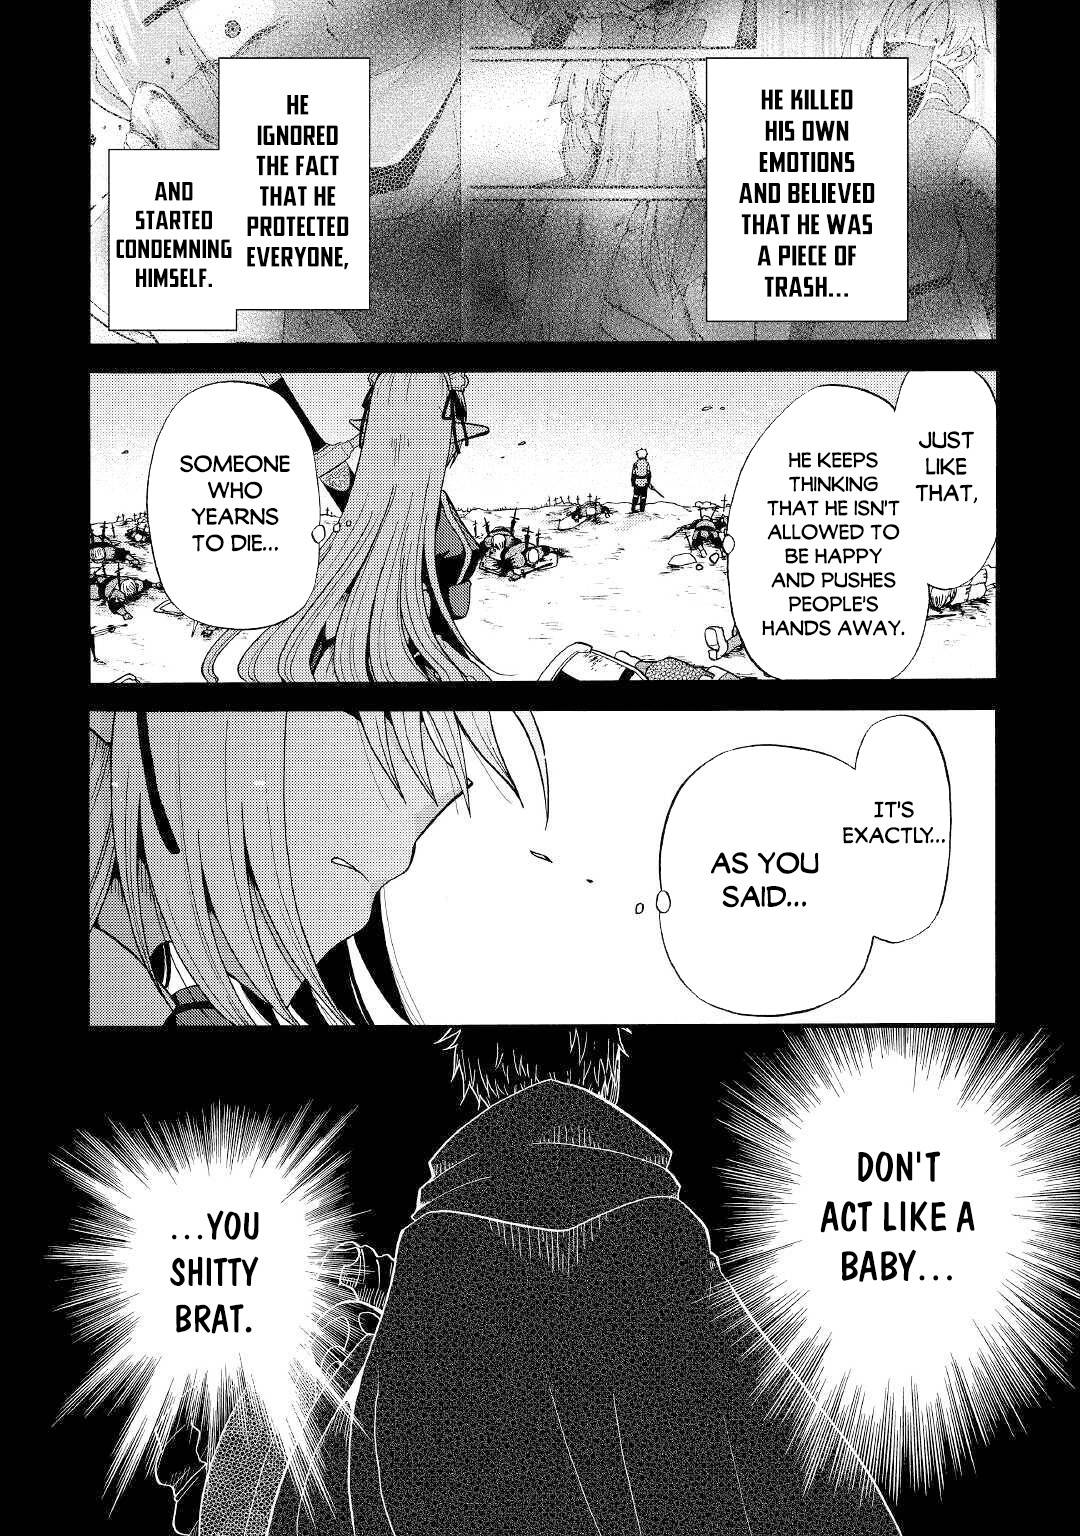 Previous Life Was Sword Emperor. This Life Is Trash Prince. - chapter 13 - #4